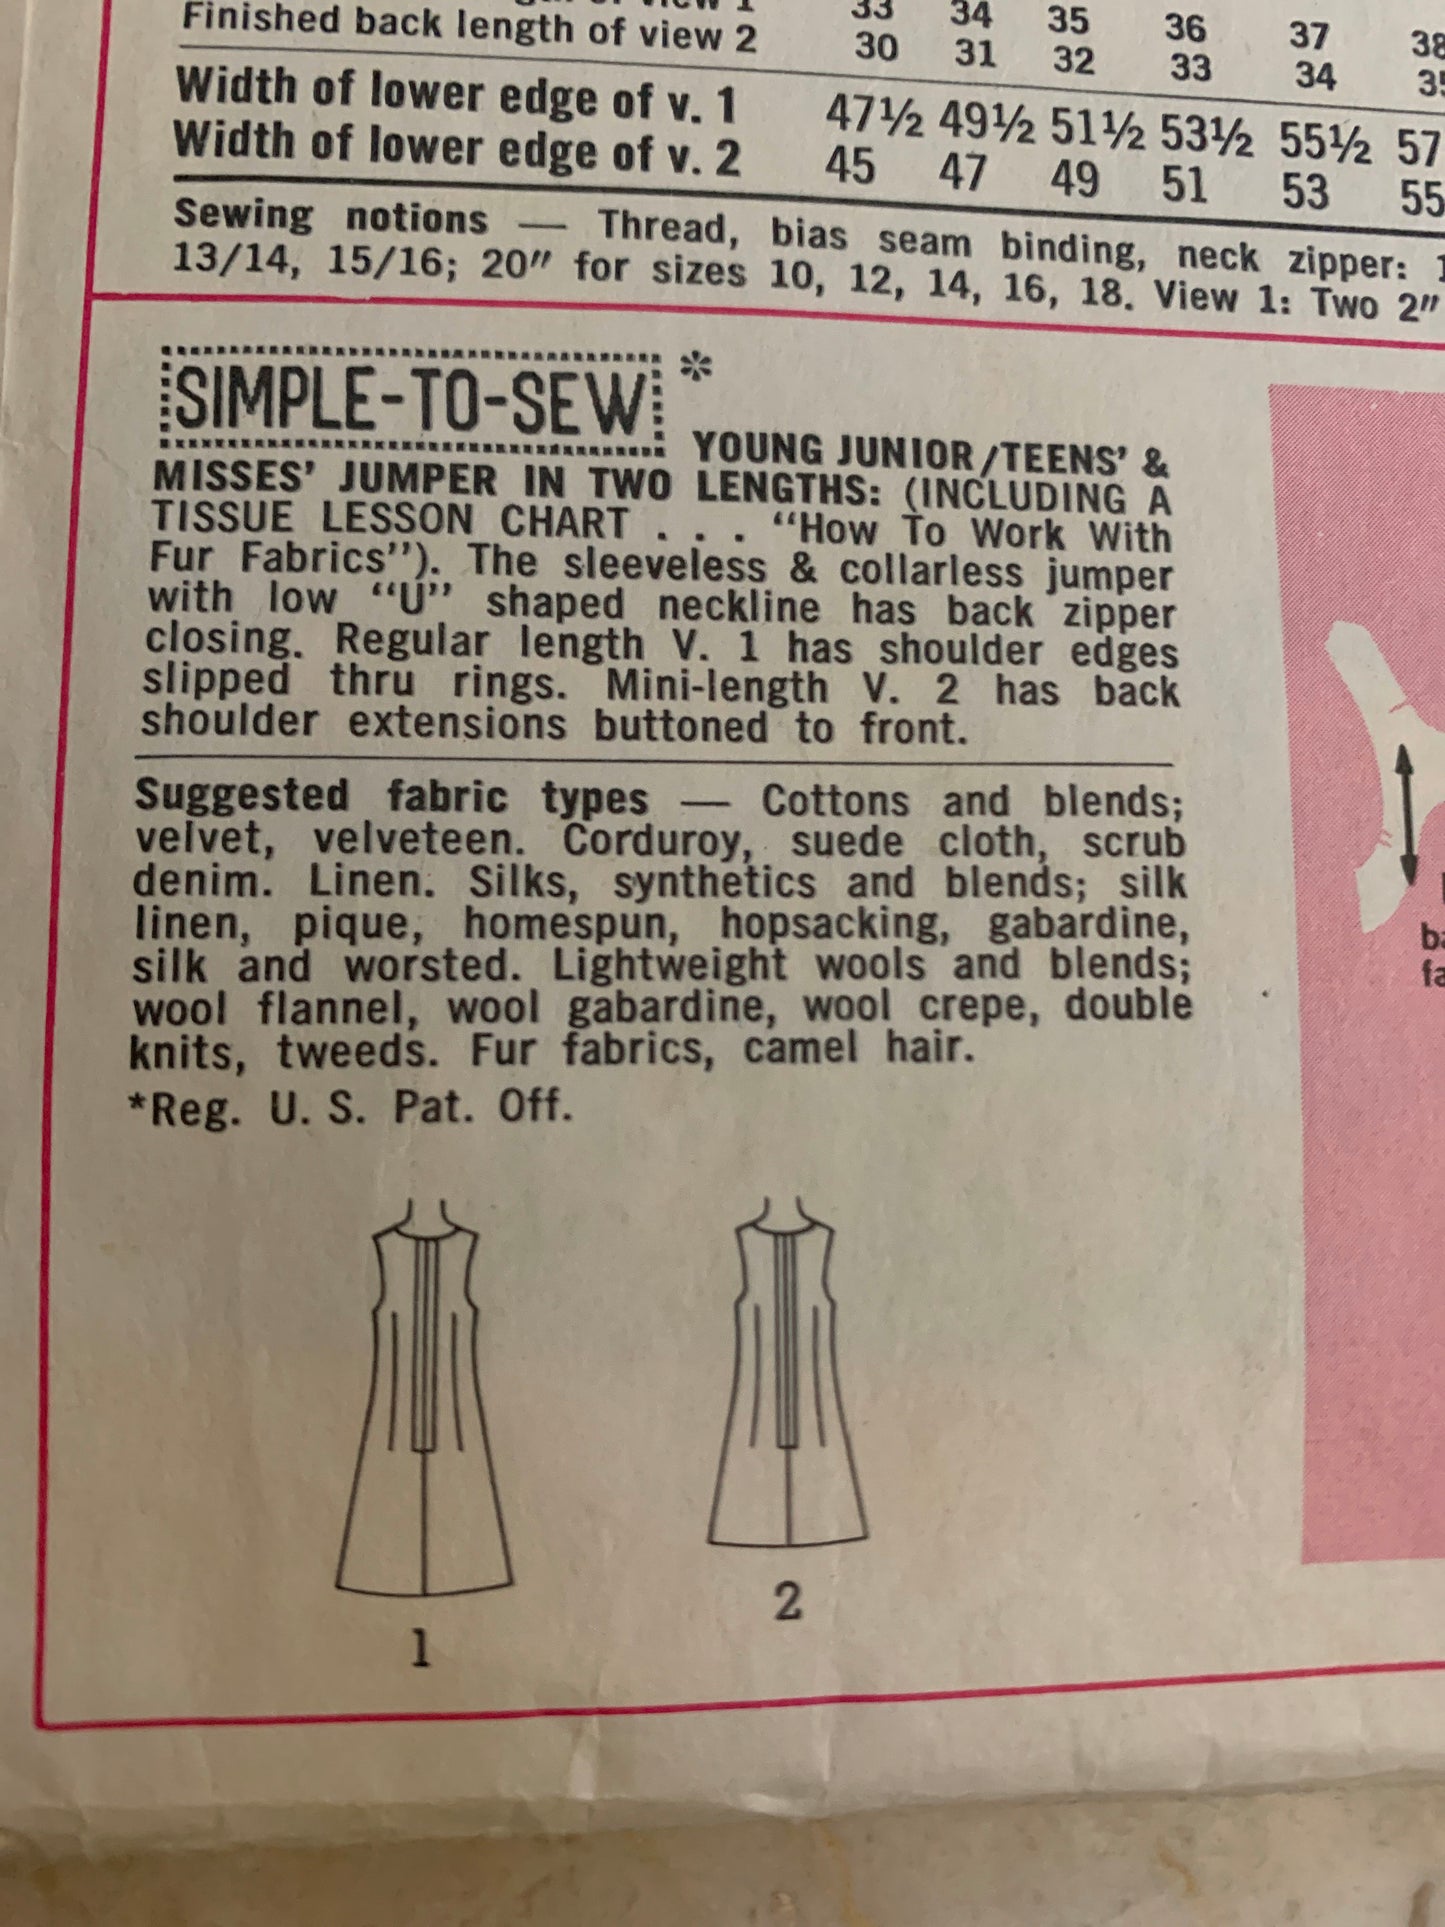 Teens’ Jumper in Two Lengths Vintage Sewing Pattern 1960s Size 9/10 Girls Dress Simplicity 8414